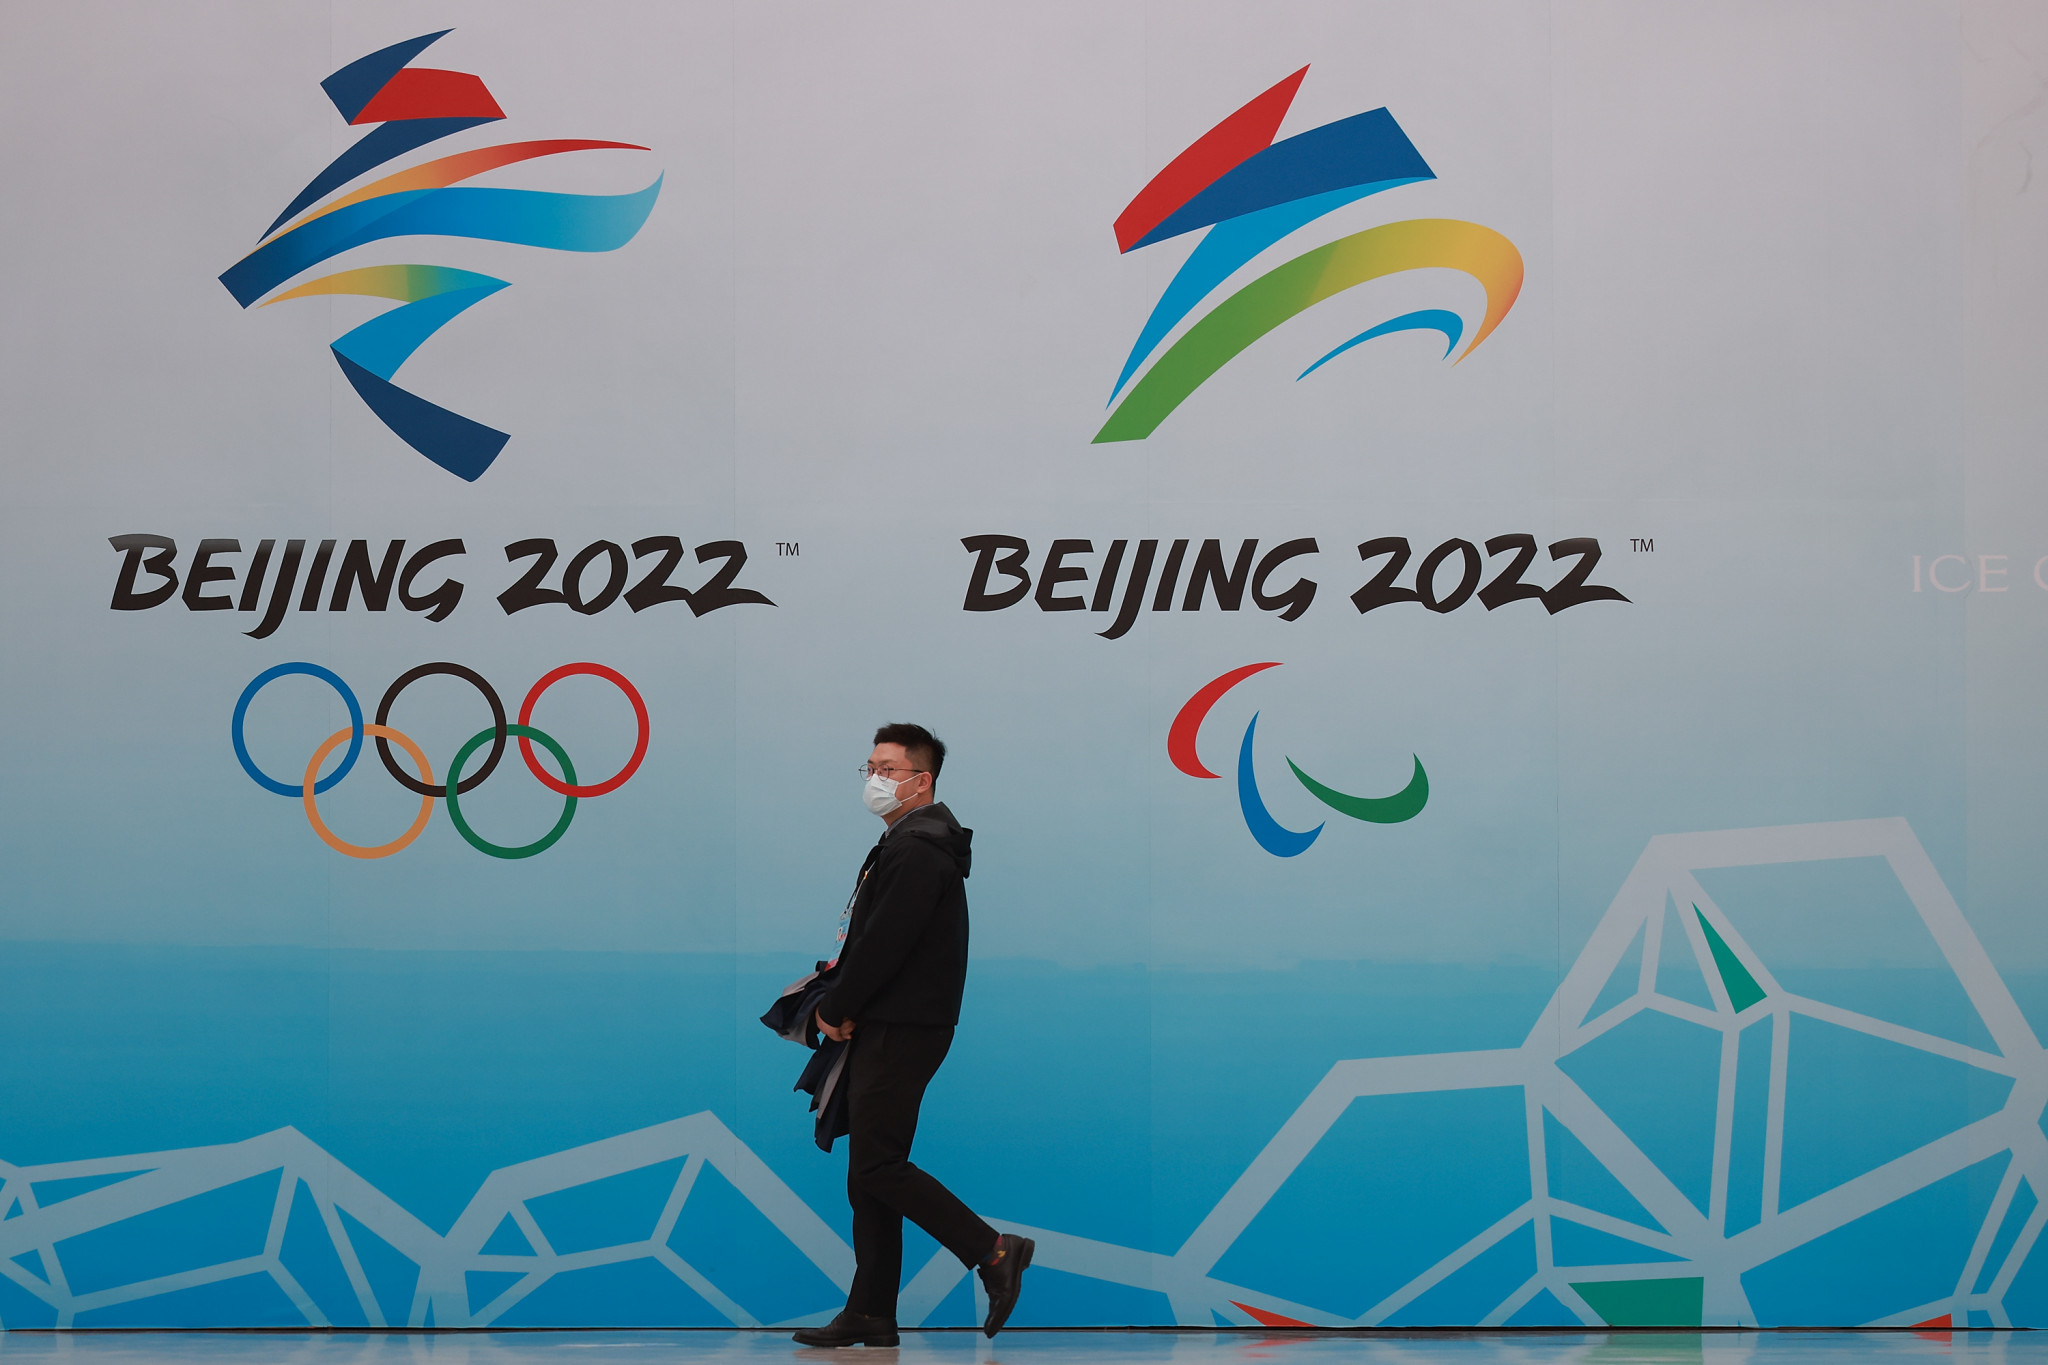 Human Rights Watch calls on Olympic sponsors to put pressure on China before Beijing 2022